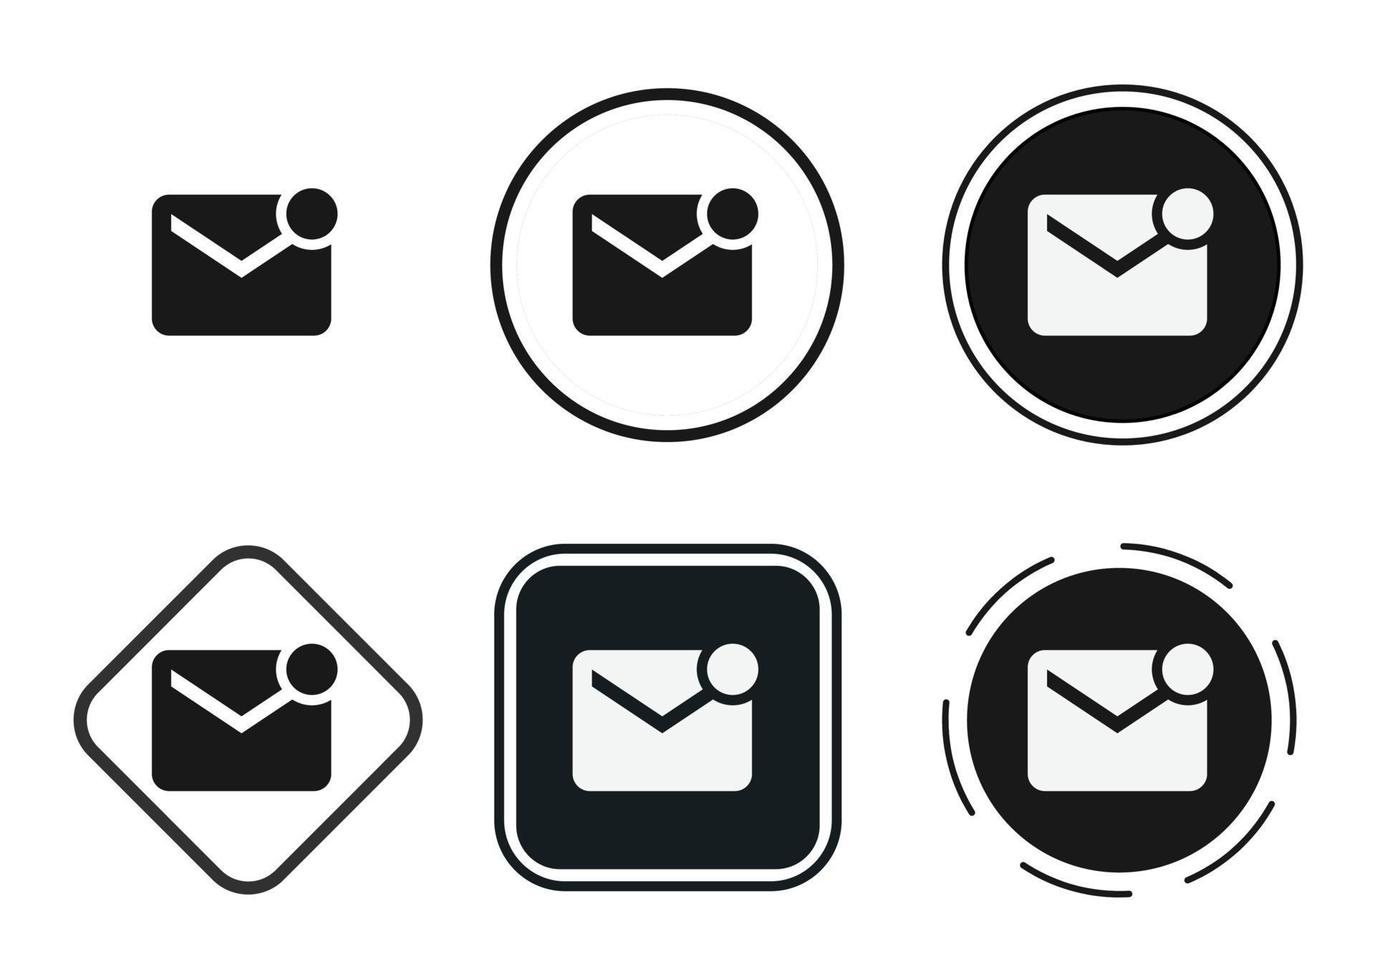 mail unread icon . web icon set . icons collection flat. Simple vector illustration.